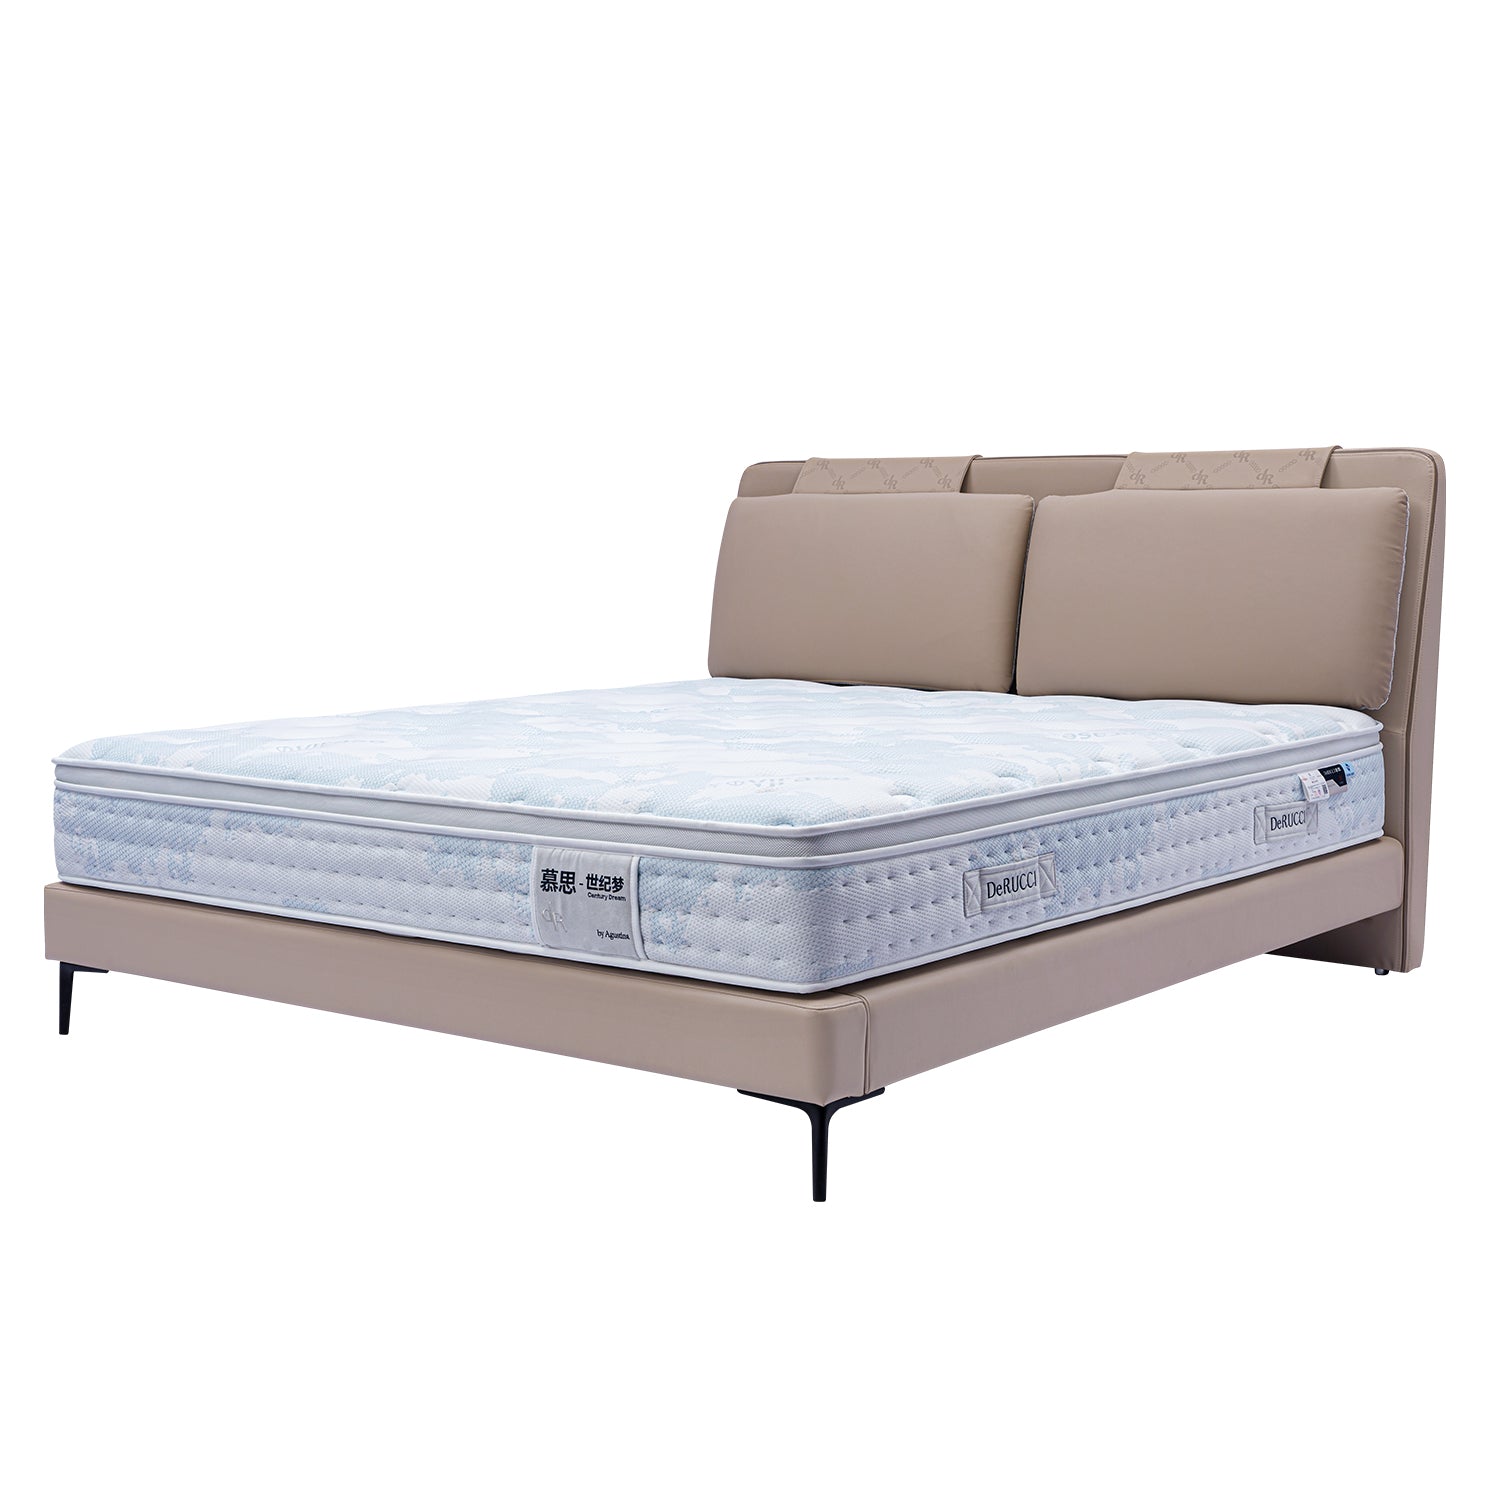 DeRUCCI Bed Frame BOC1 - 006 with light tan upholstered headboard and neutral grey mattress.